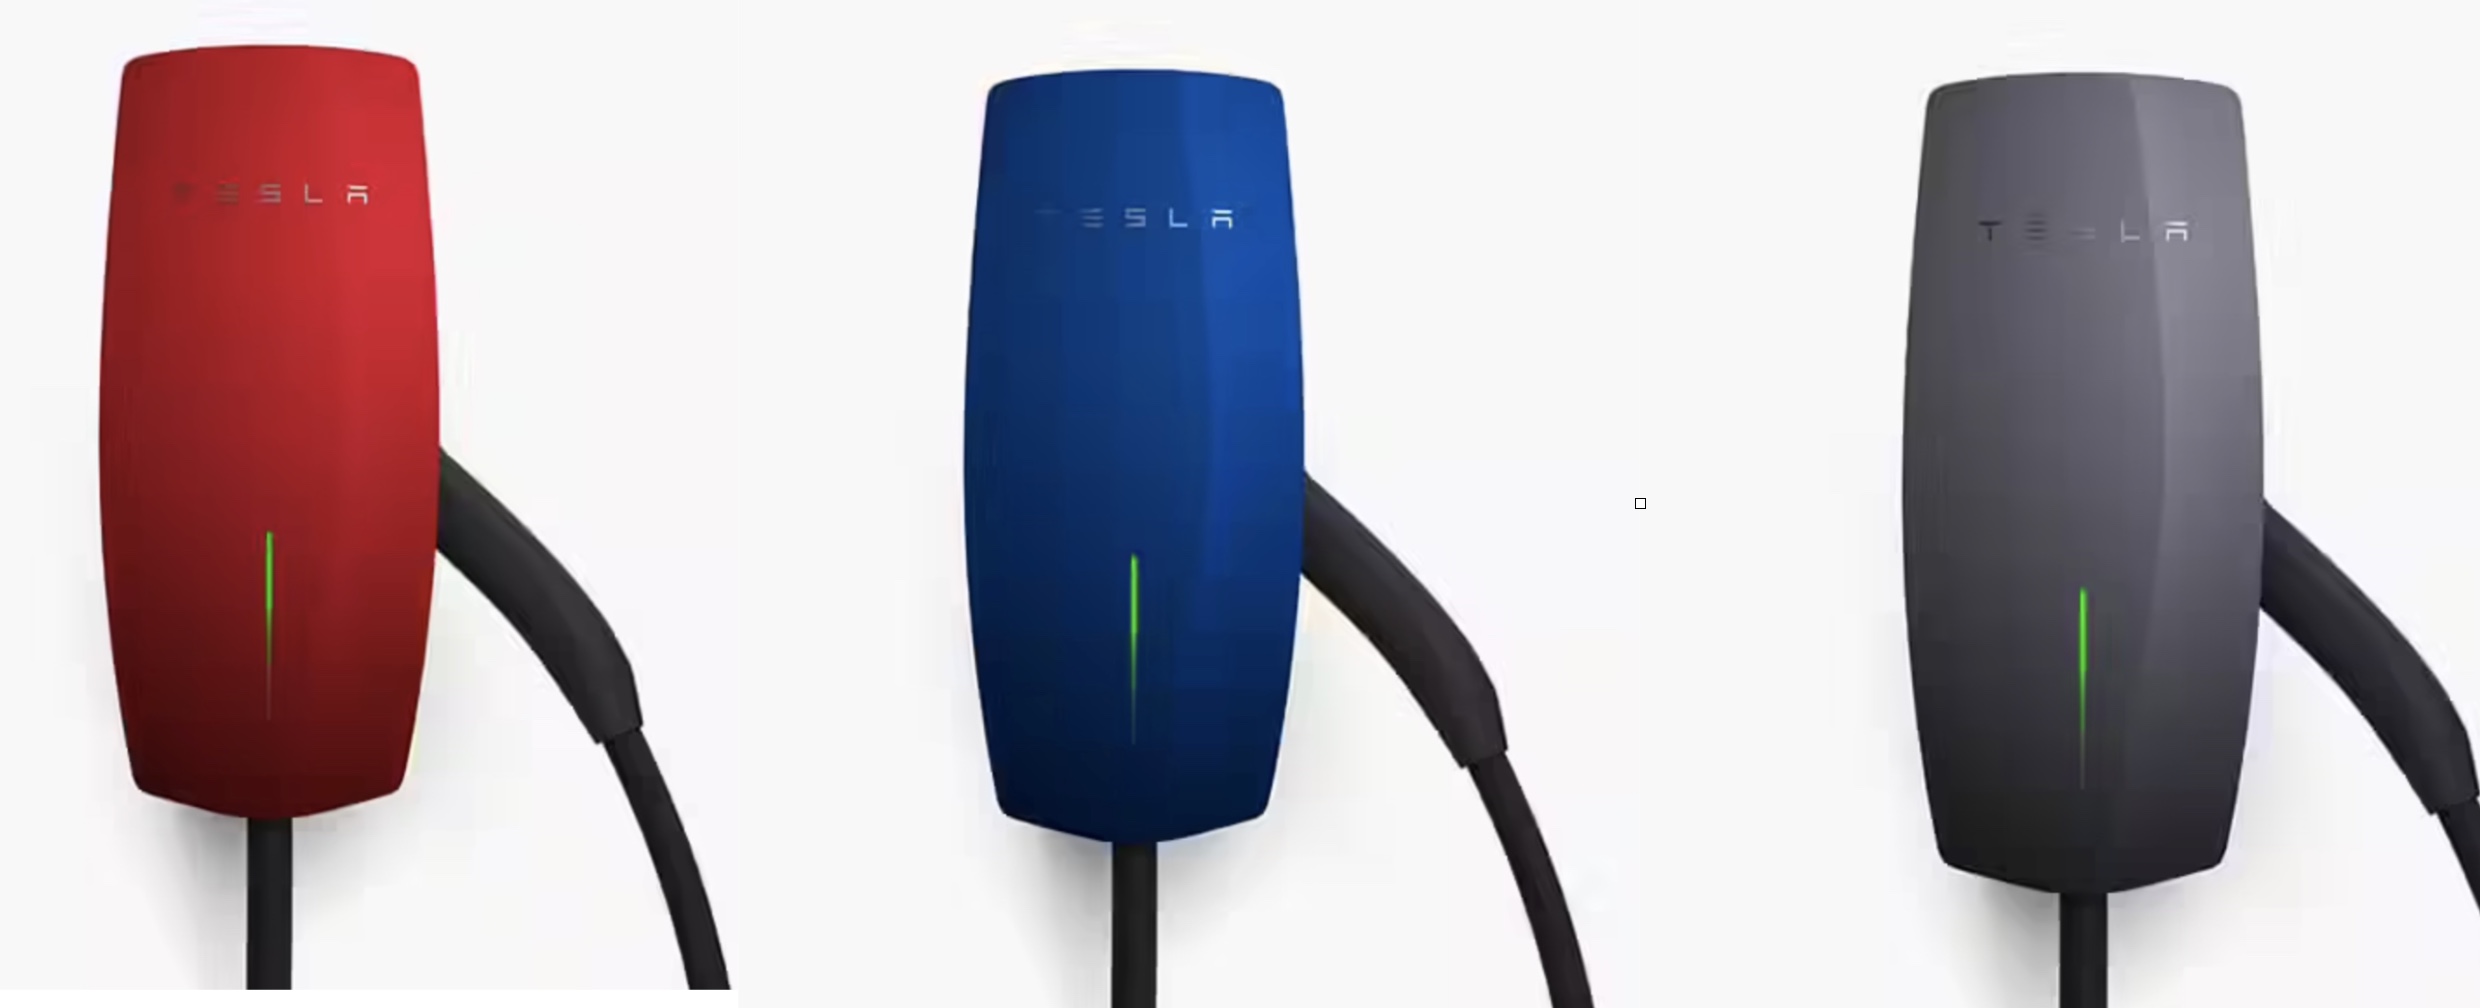 Tesla releases new charger faceplates that matches car colors - holiday  gift for Tesla owners? | Electrek